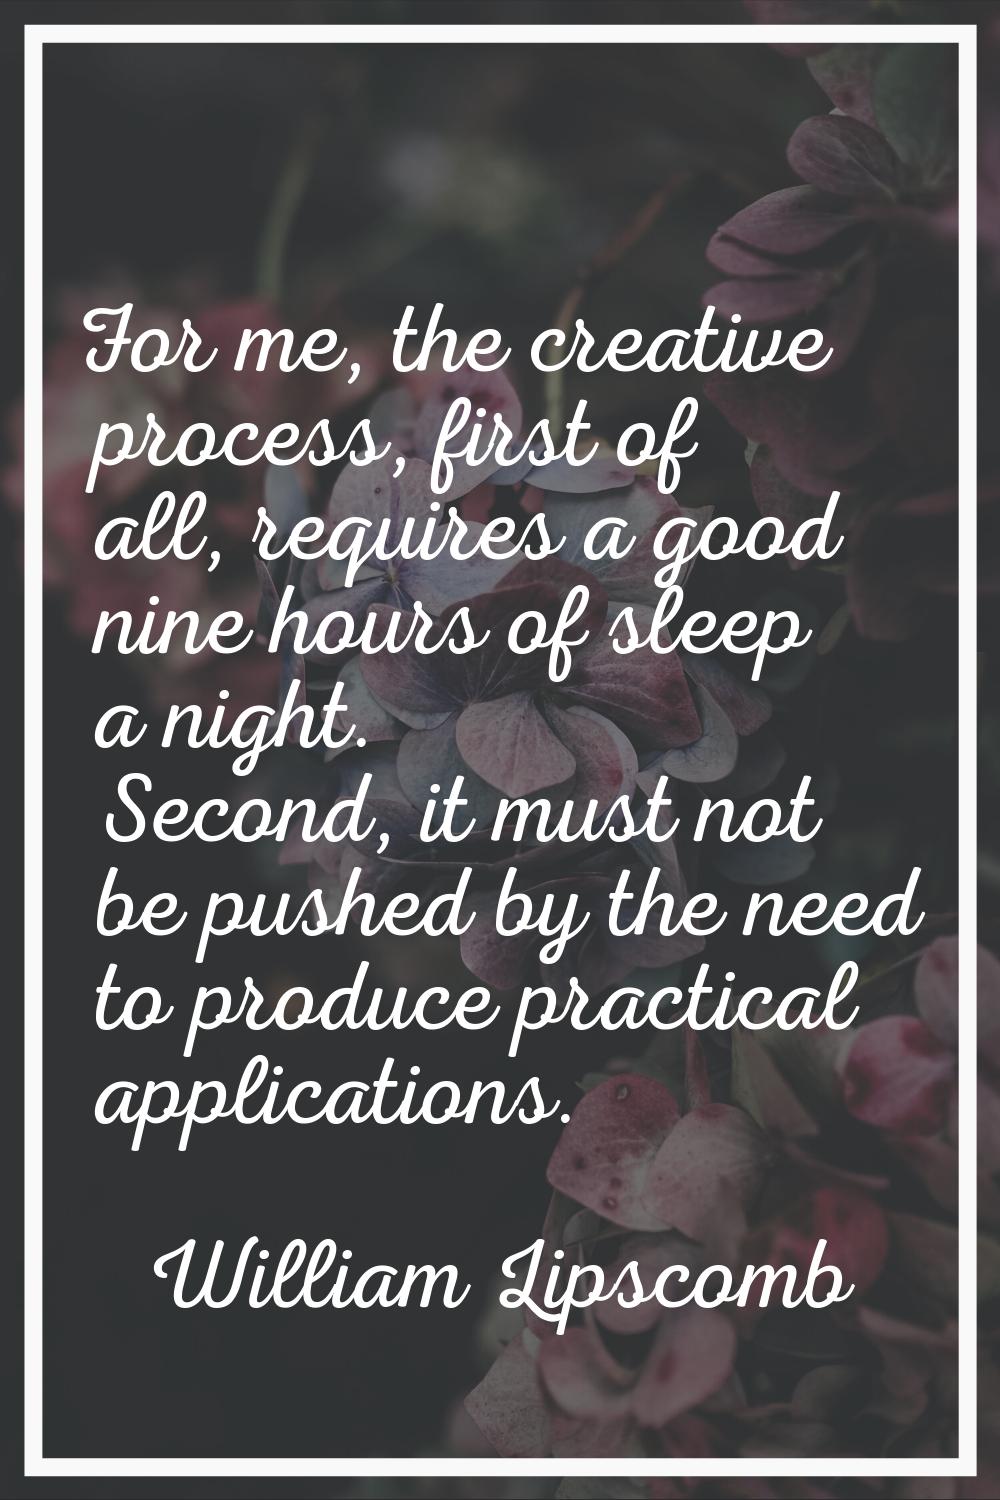 For me, the creative process, first of all, requires a good nine hours of sleep a night. Second, it